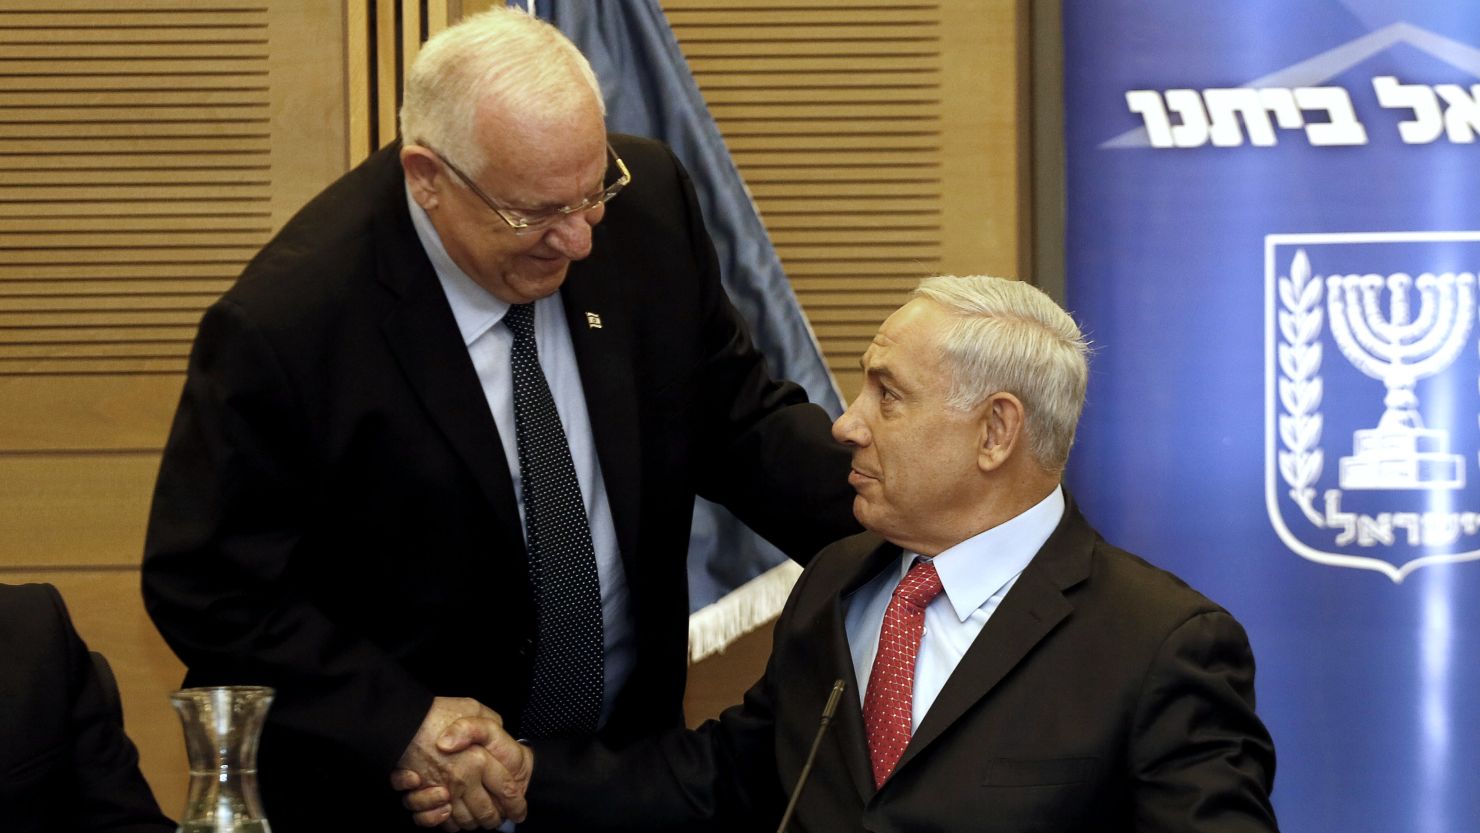 Israeli PM Benjamin Netanyahu, right, is shown with President Reuven Rivlin at the Knesset in June 2014.